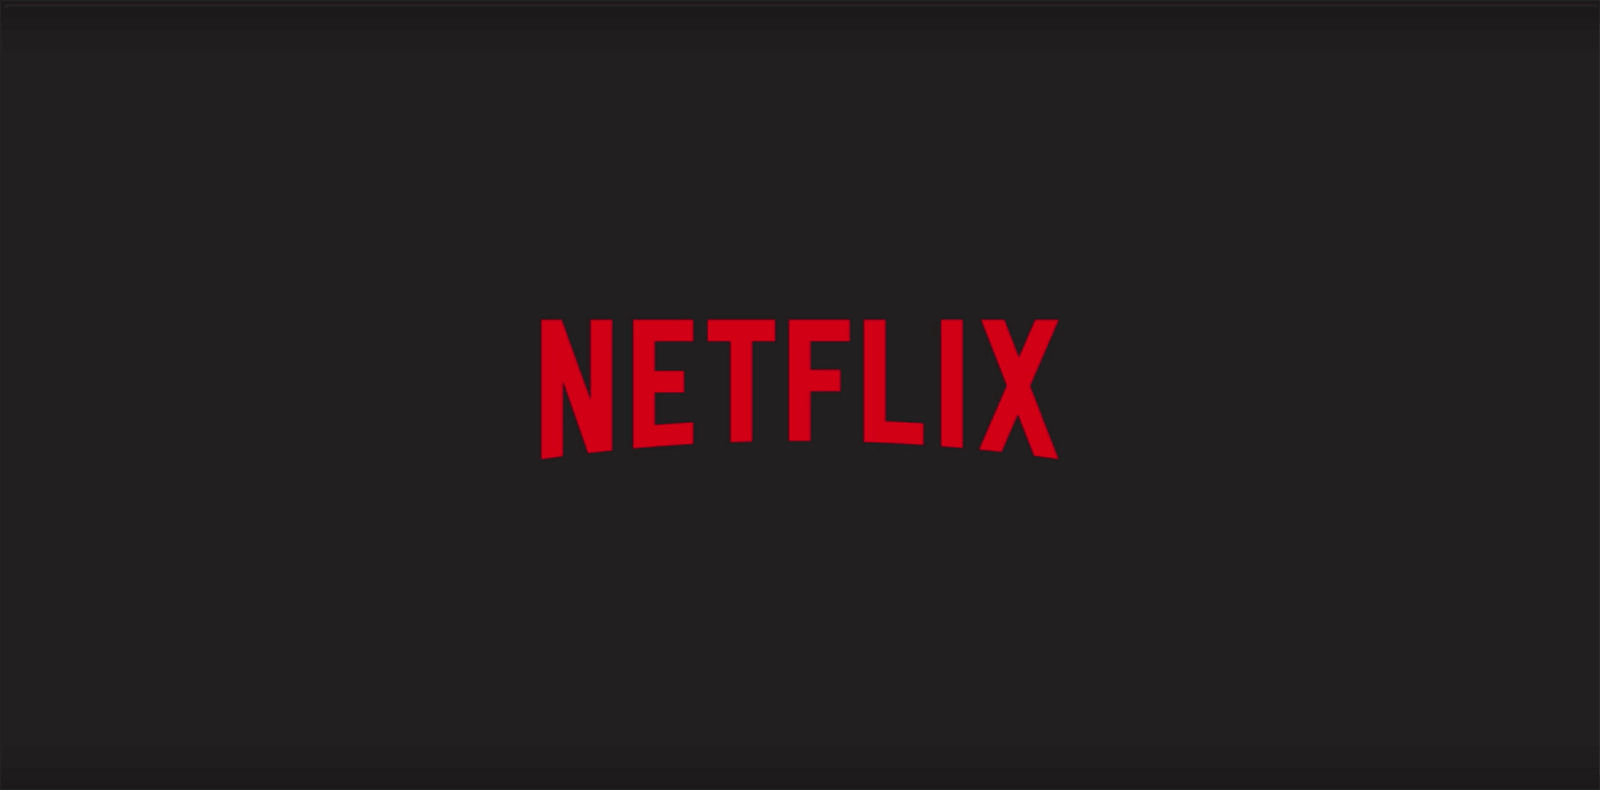 Netflix finally adds more subtitle options for TV